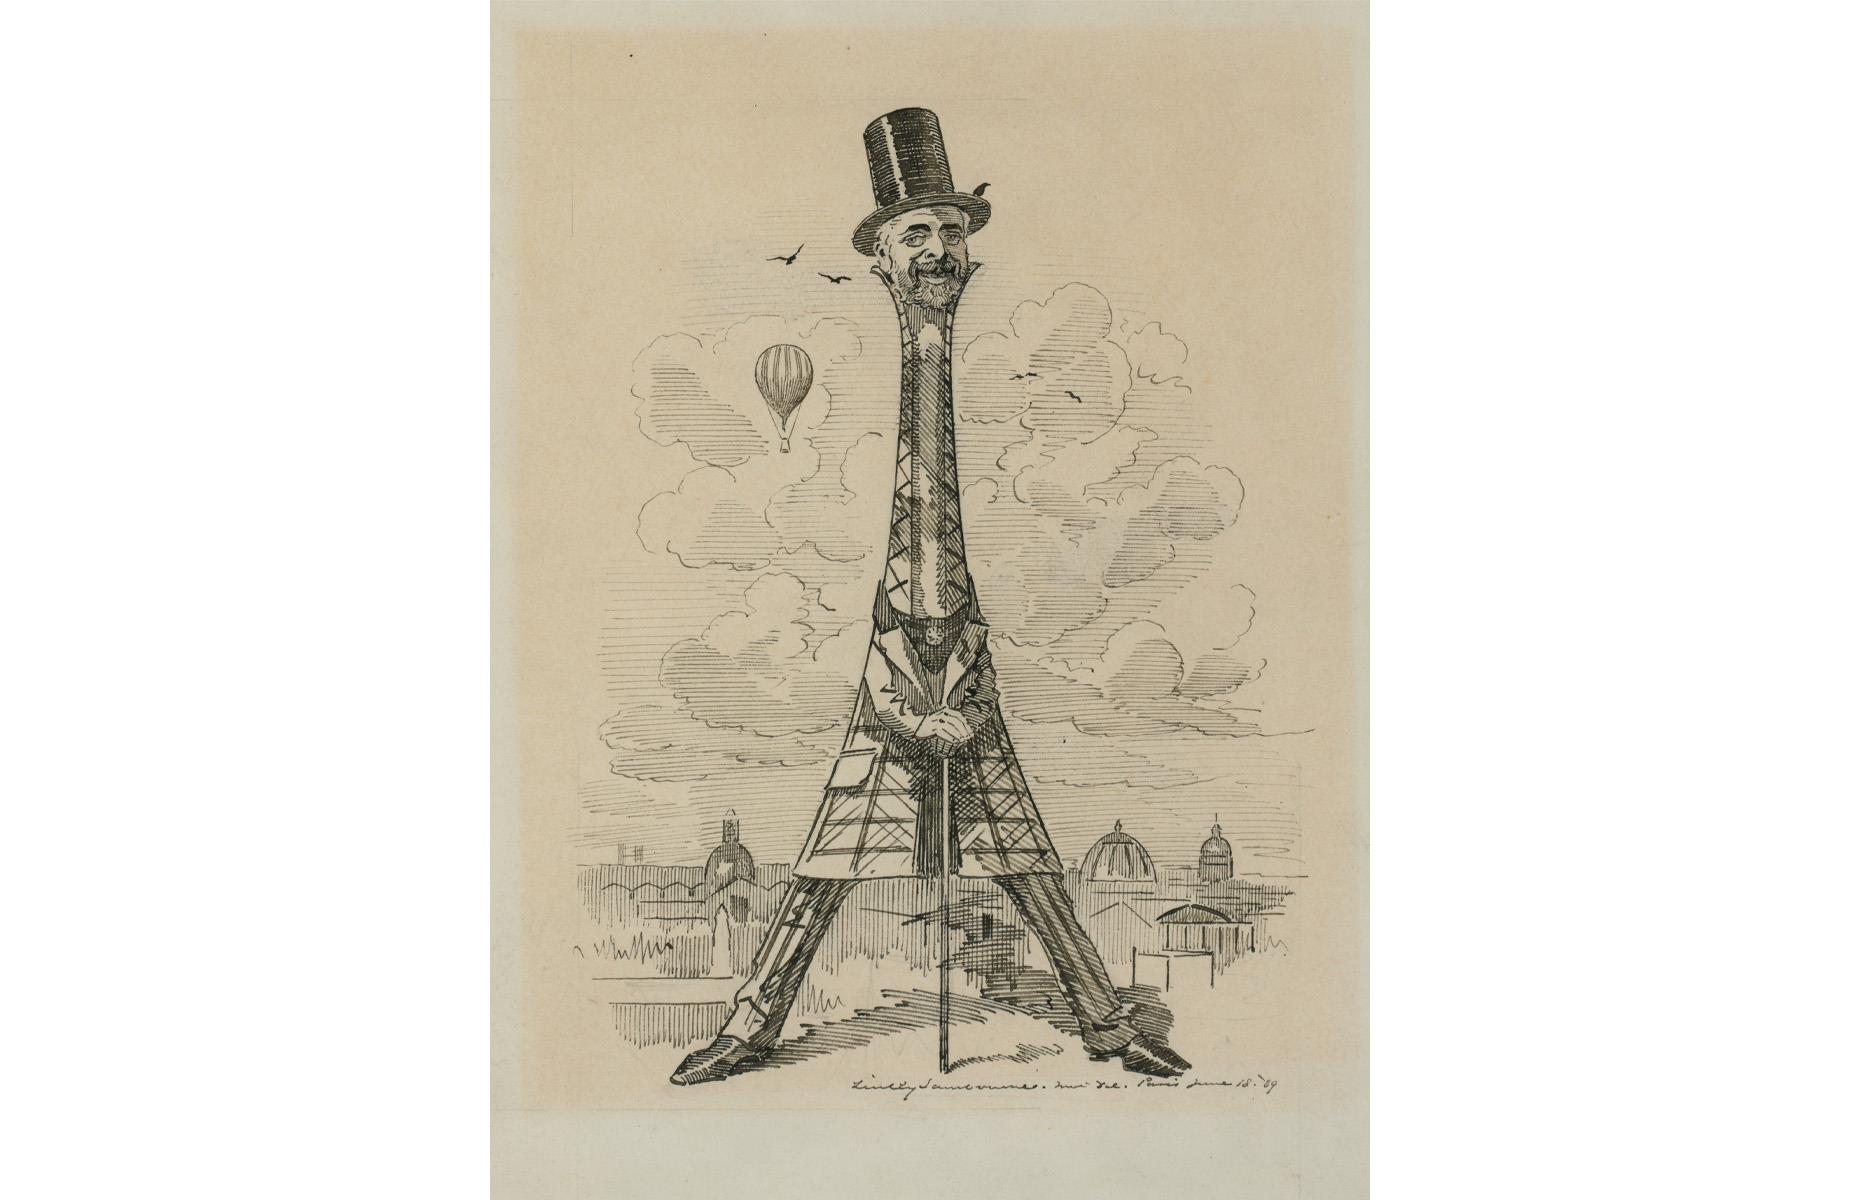 <p>In fact, the biggest names in the world of art and literature petitioned for the tower not to be built at all. They published an open letter titled "Protest against the Tower of Monsieur Eiffel" in newspaper <em>Le Temps</em> begging Monsieur Alphand, the World's Fair's director of works, to stop its construction. Novelist Leon Bloy called it a “truly tragic street lamp." Author Guy de Maupassant thought it looked like a “giant ungainly skeleton." And art critic Joris-Karl Huysmans compared it to a half-built factory pipe.</p>